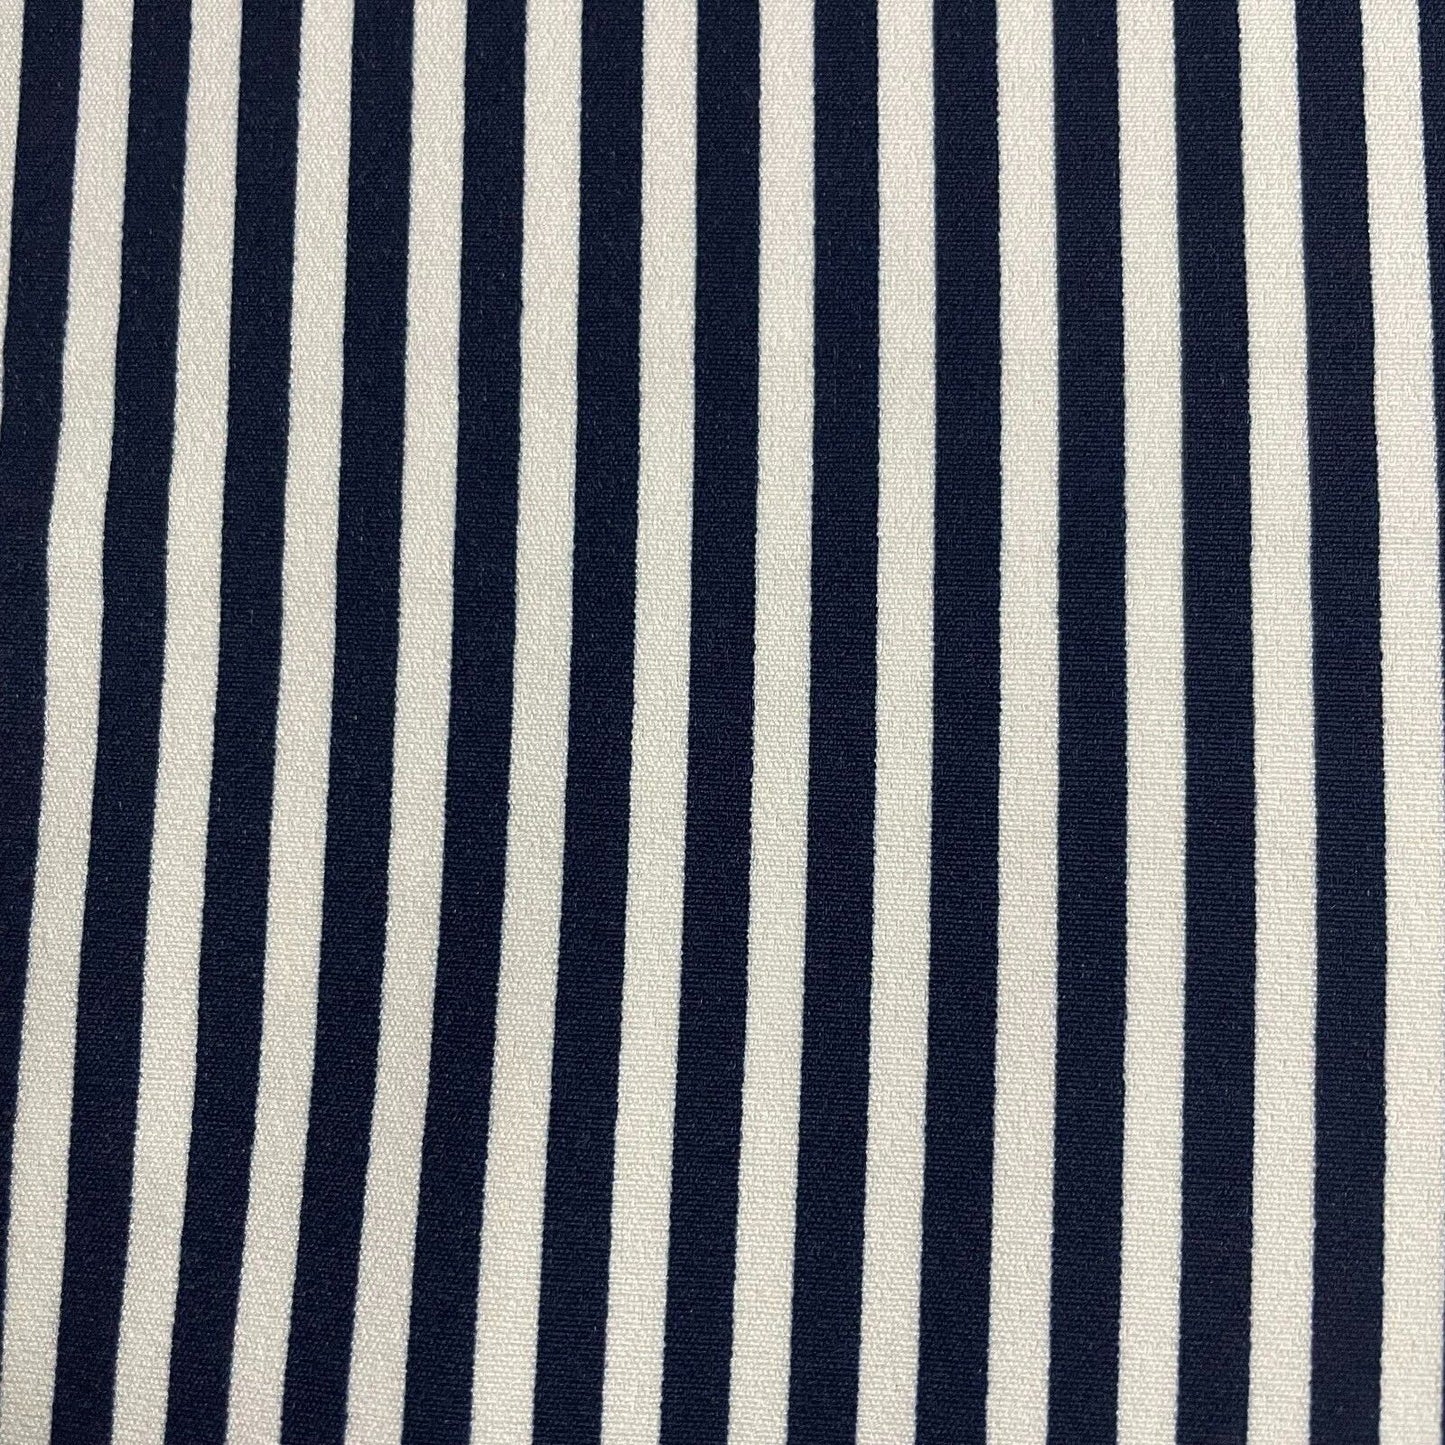 Woven Dressmaking Fabric Striped Printed 55" Wide